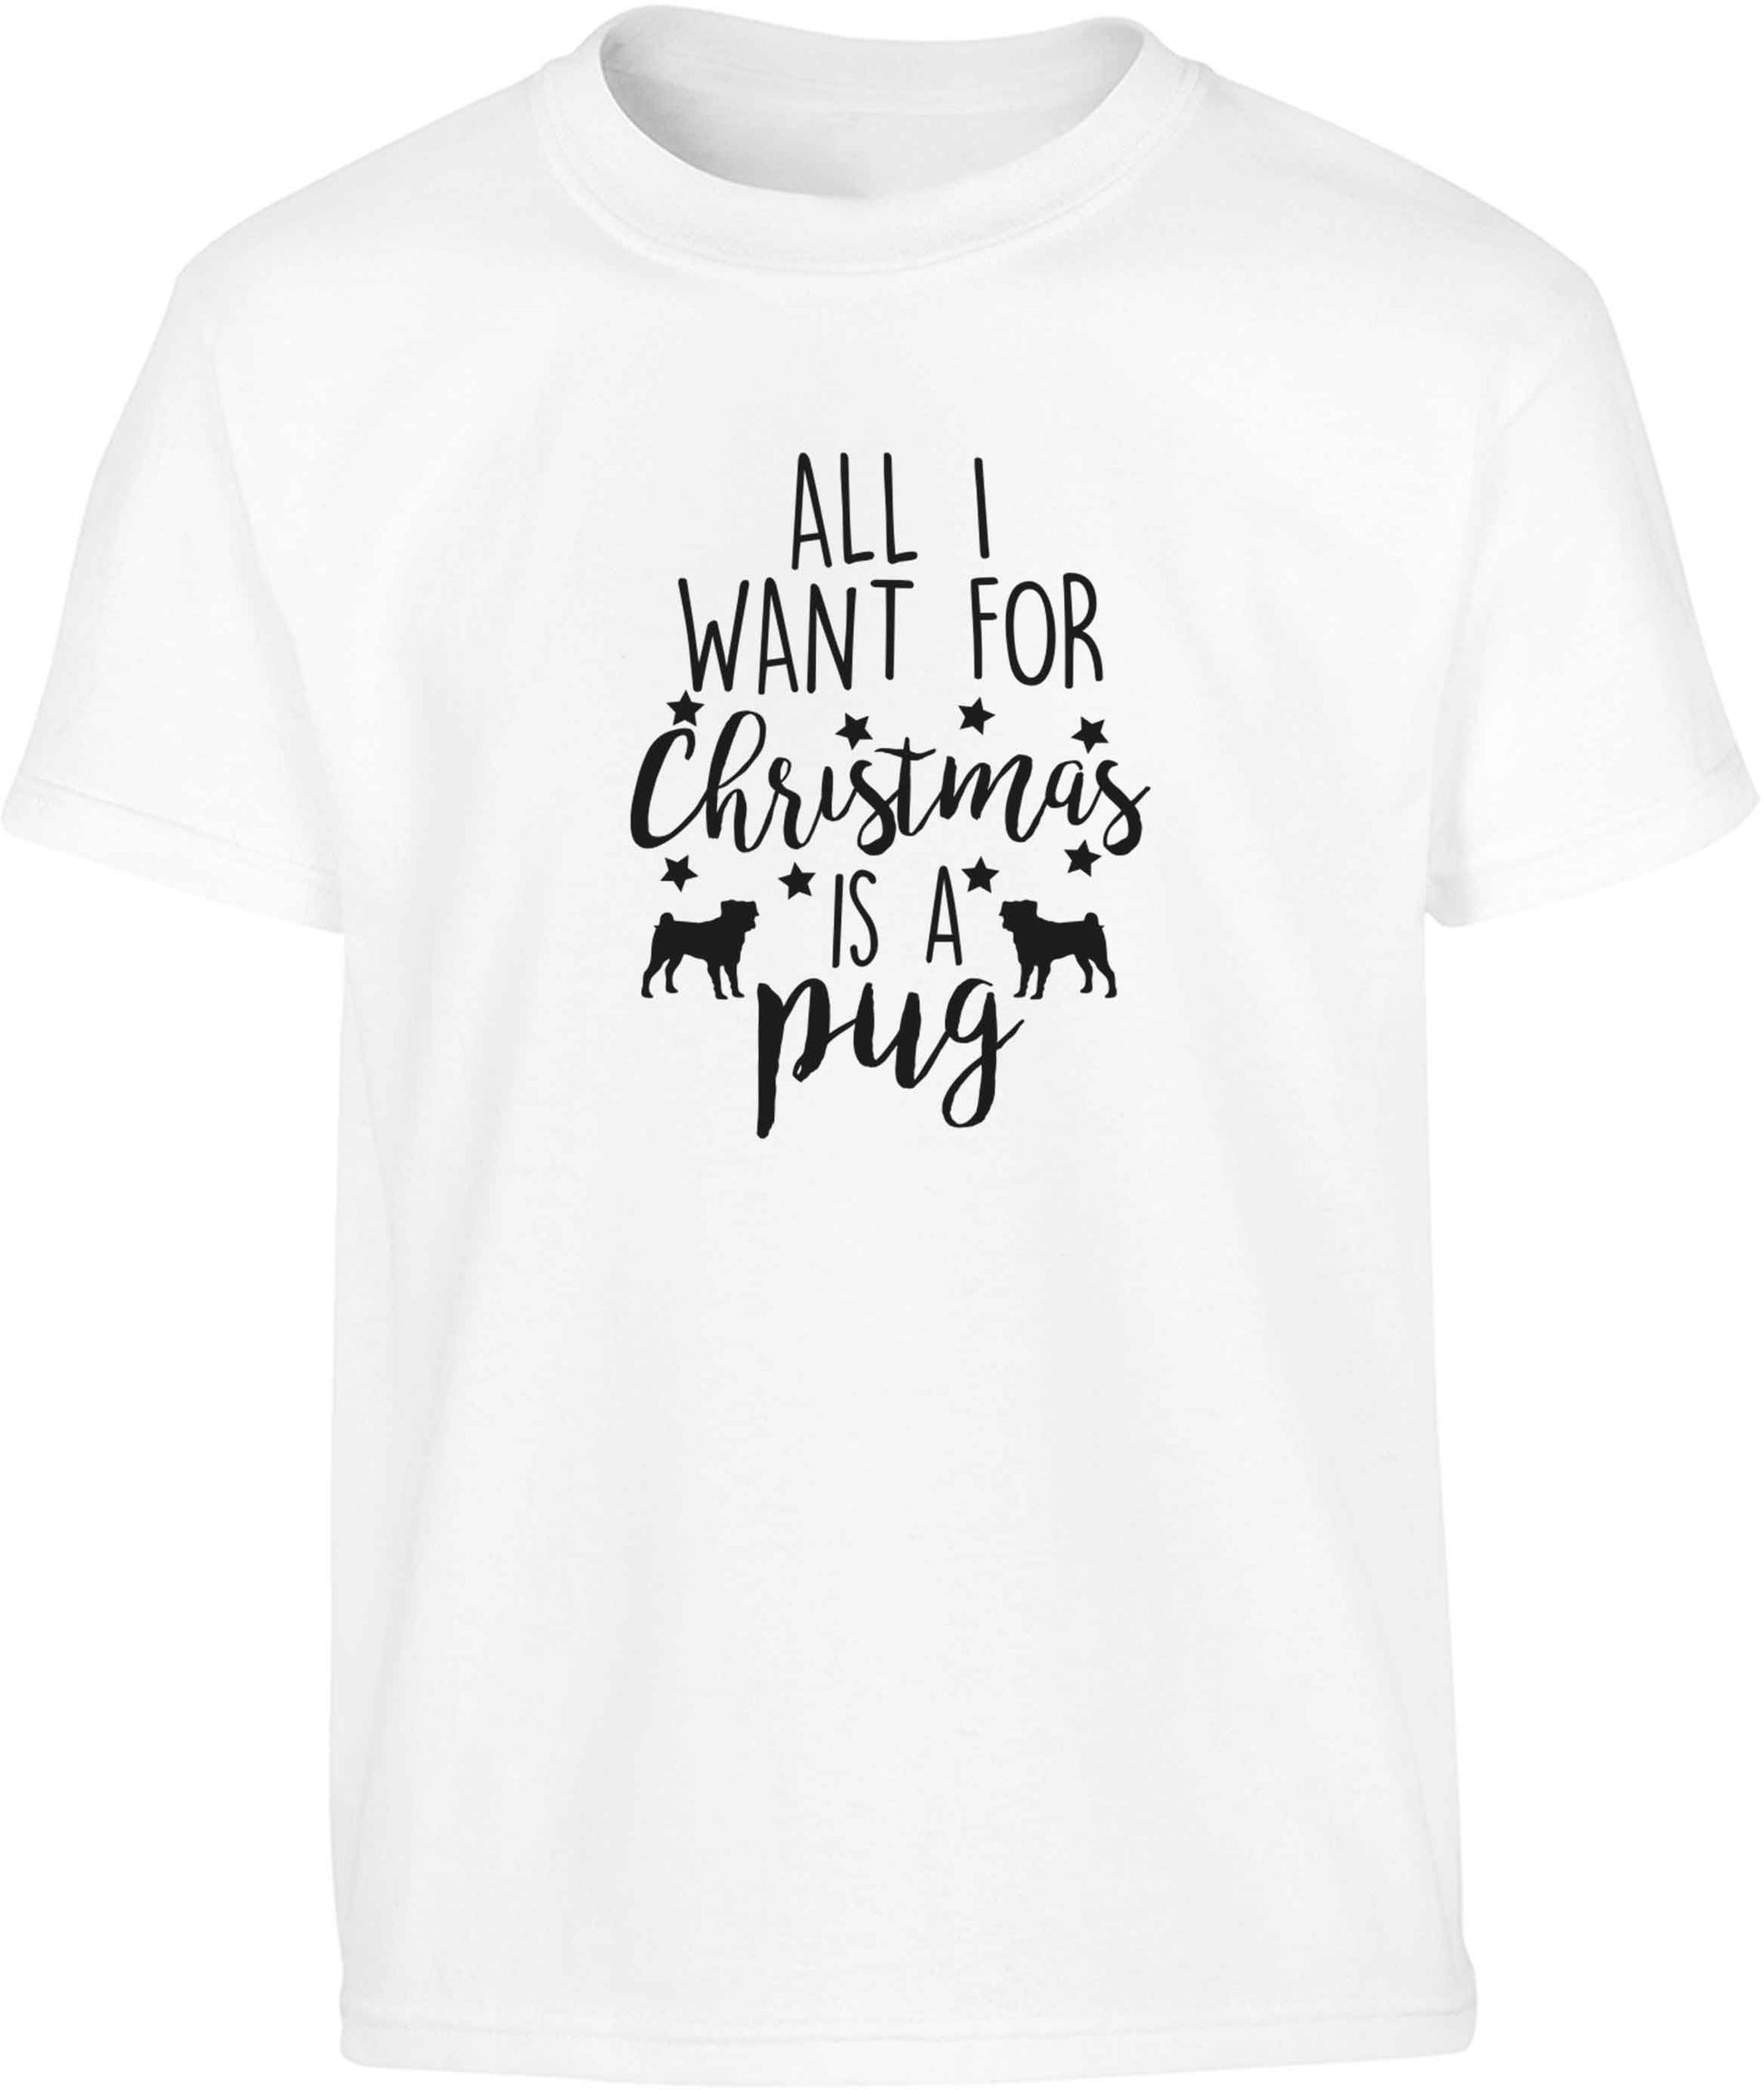 All I want for Christmas is a pug Children's white Tshirt 12-13 Years